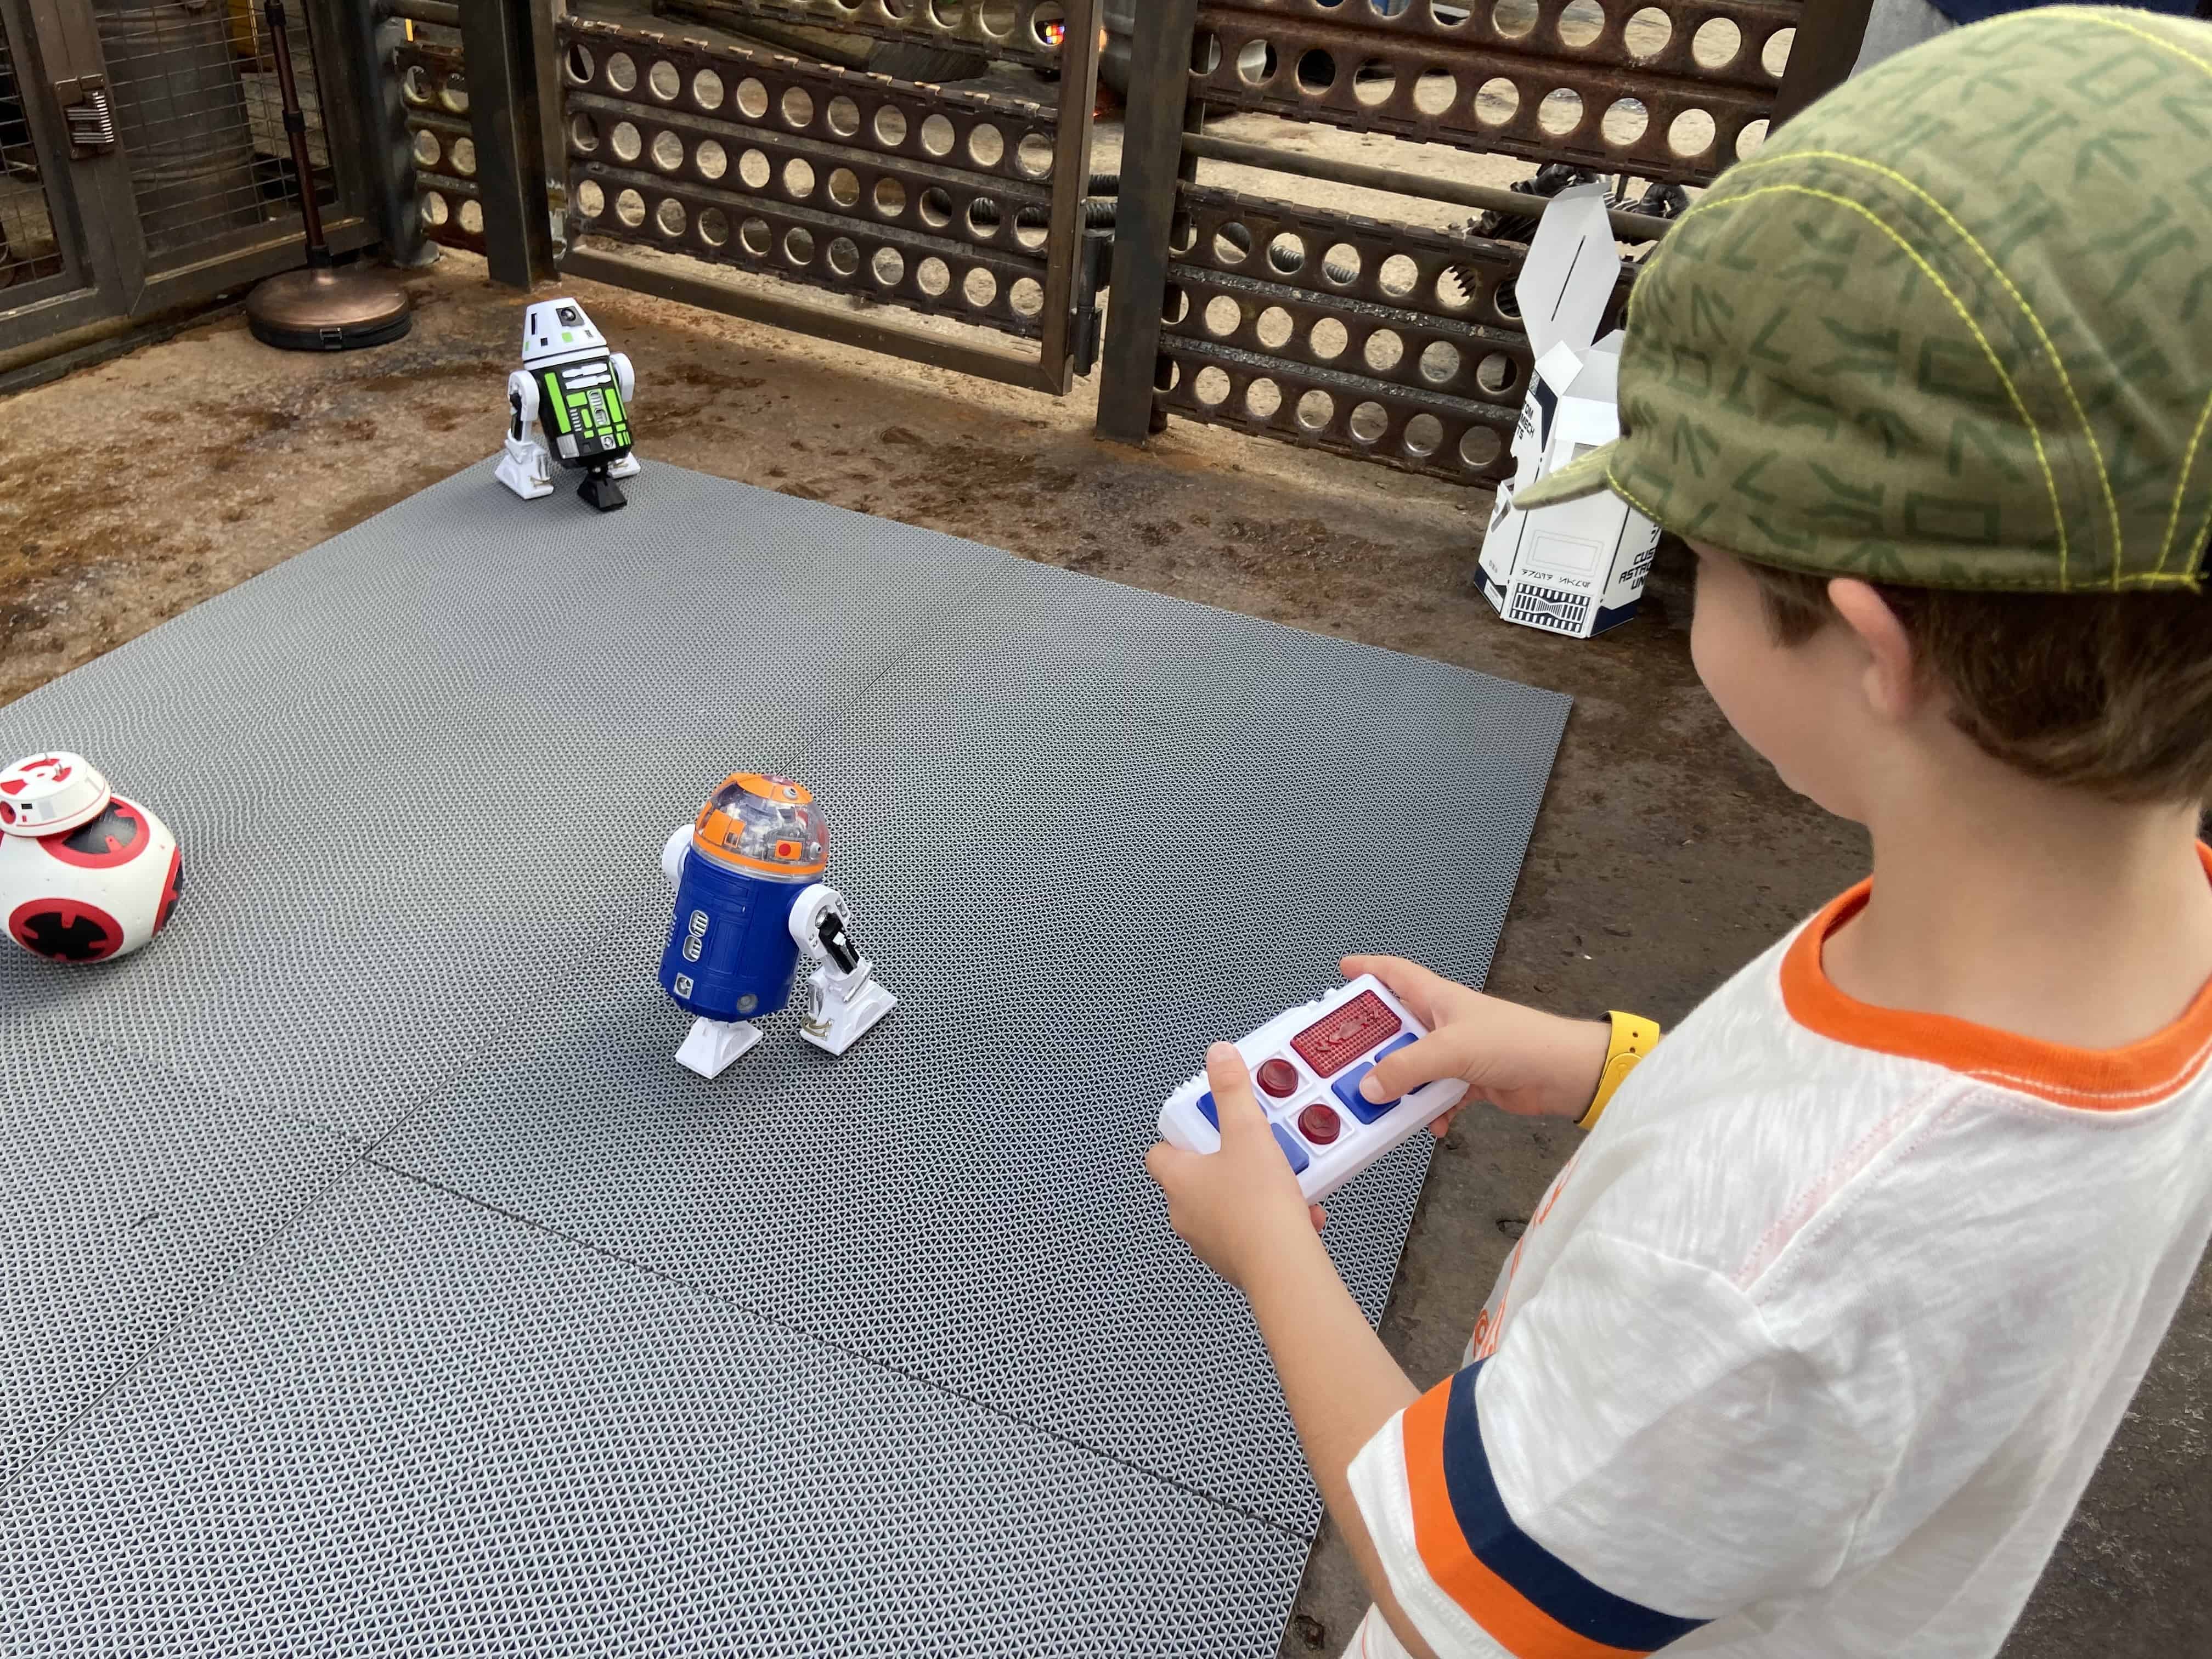 Play with your robot at Galaxy's Edge